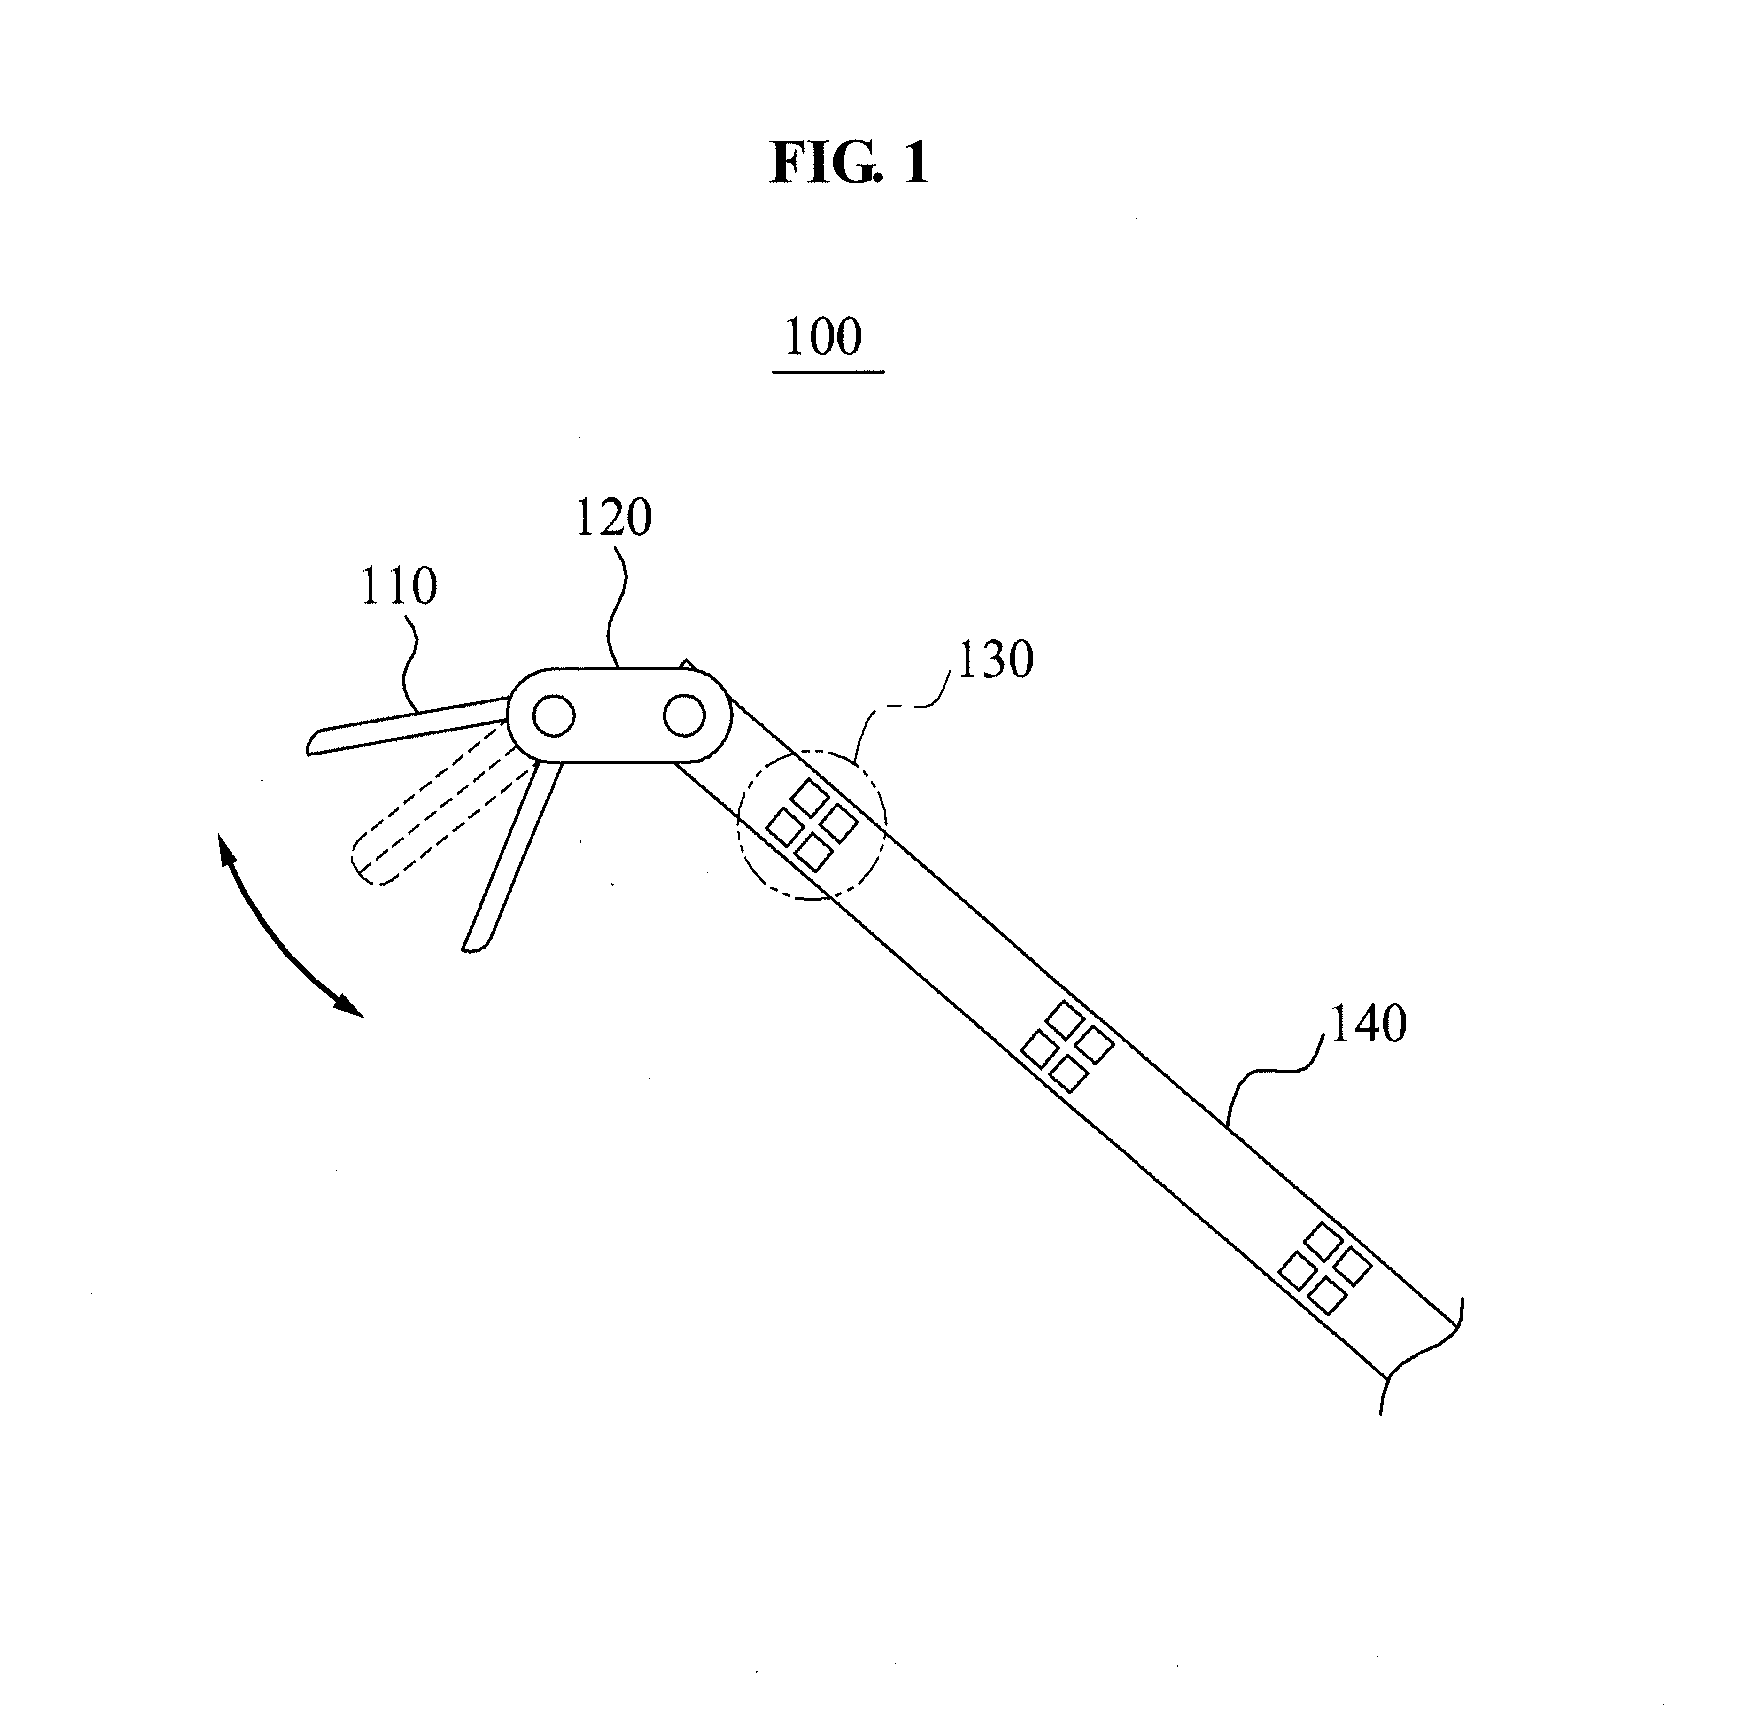 Proximity sensor used by an operation robot and method of operating the proximity sensor